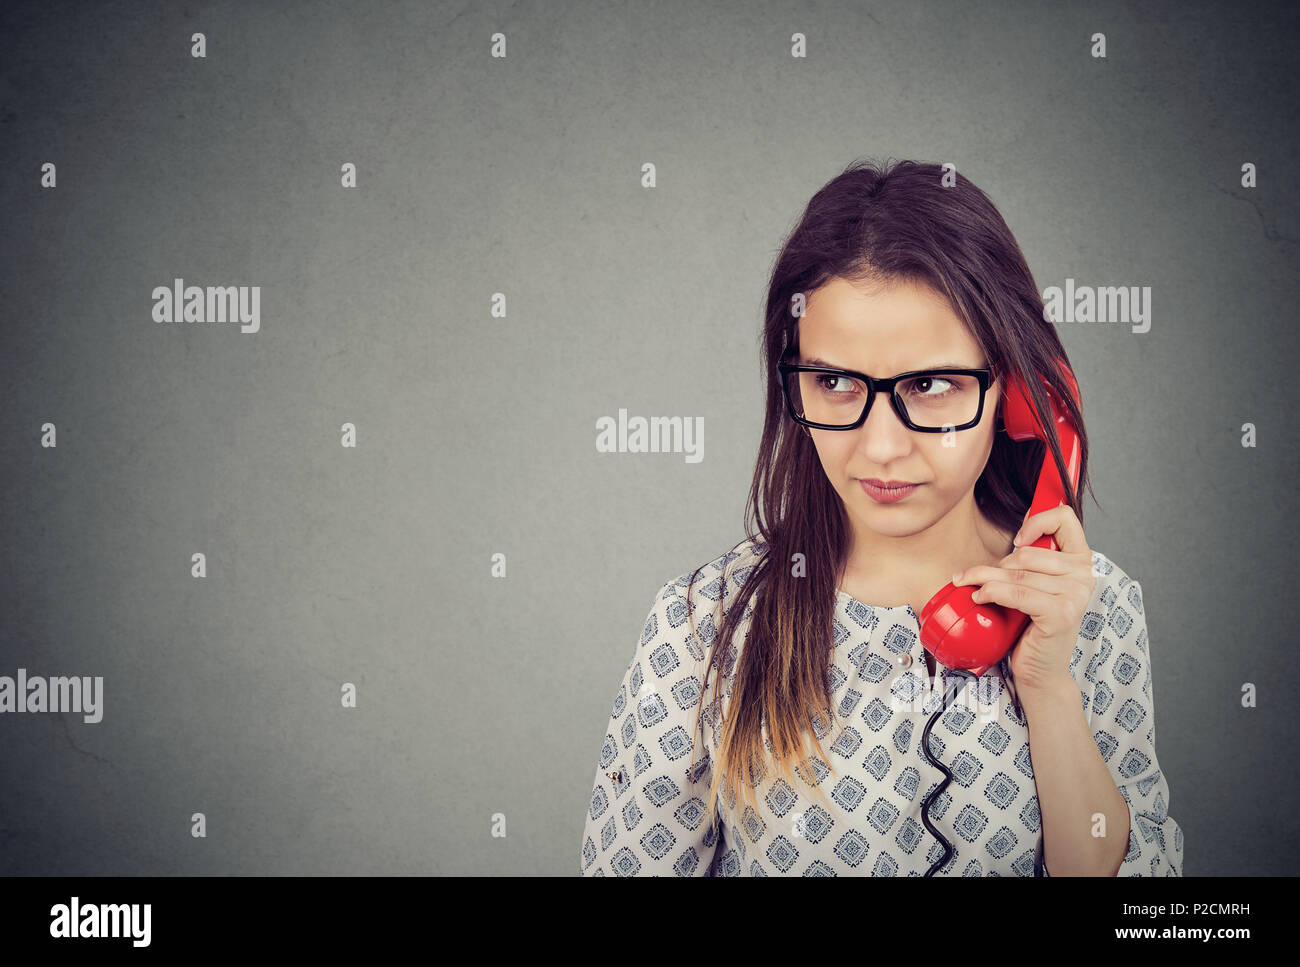 Young woman in eyeglasses talking on old fashioned phone looking away in misunderstanding and annoyance Stock Photo